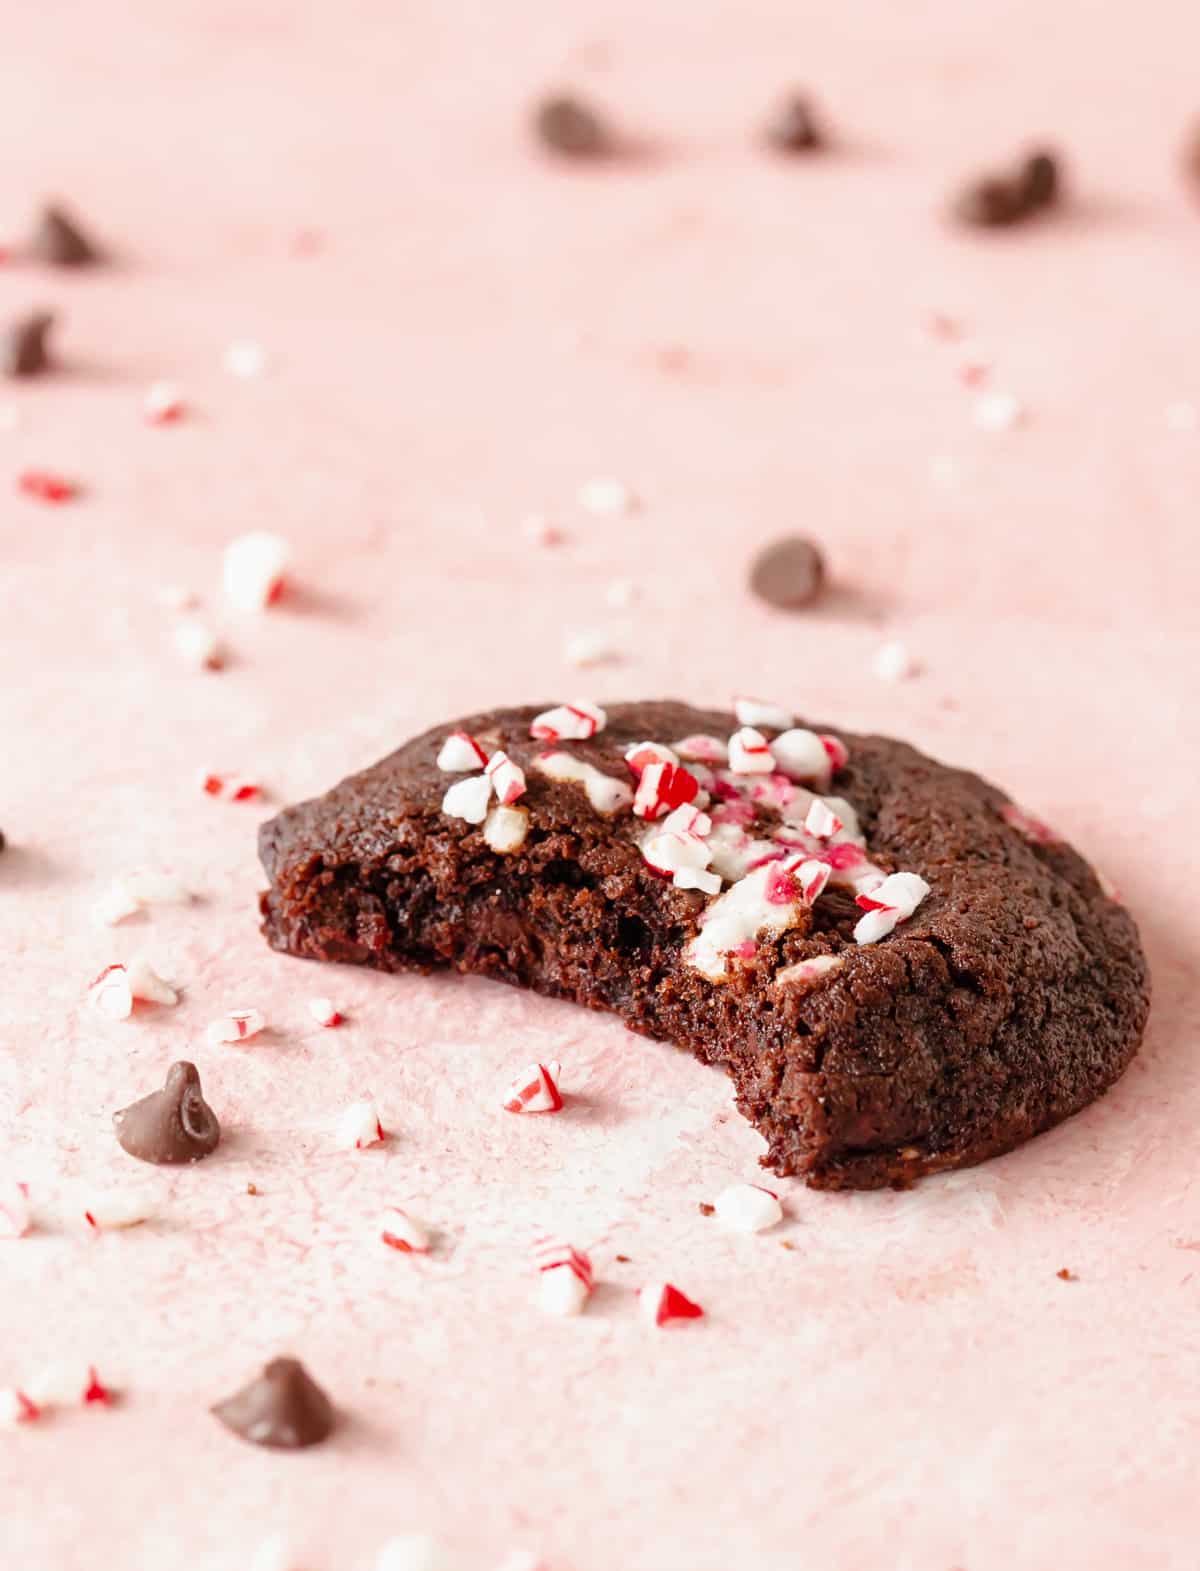 Single bitten peppermint chocolate cookie on pink surface